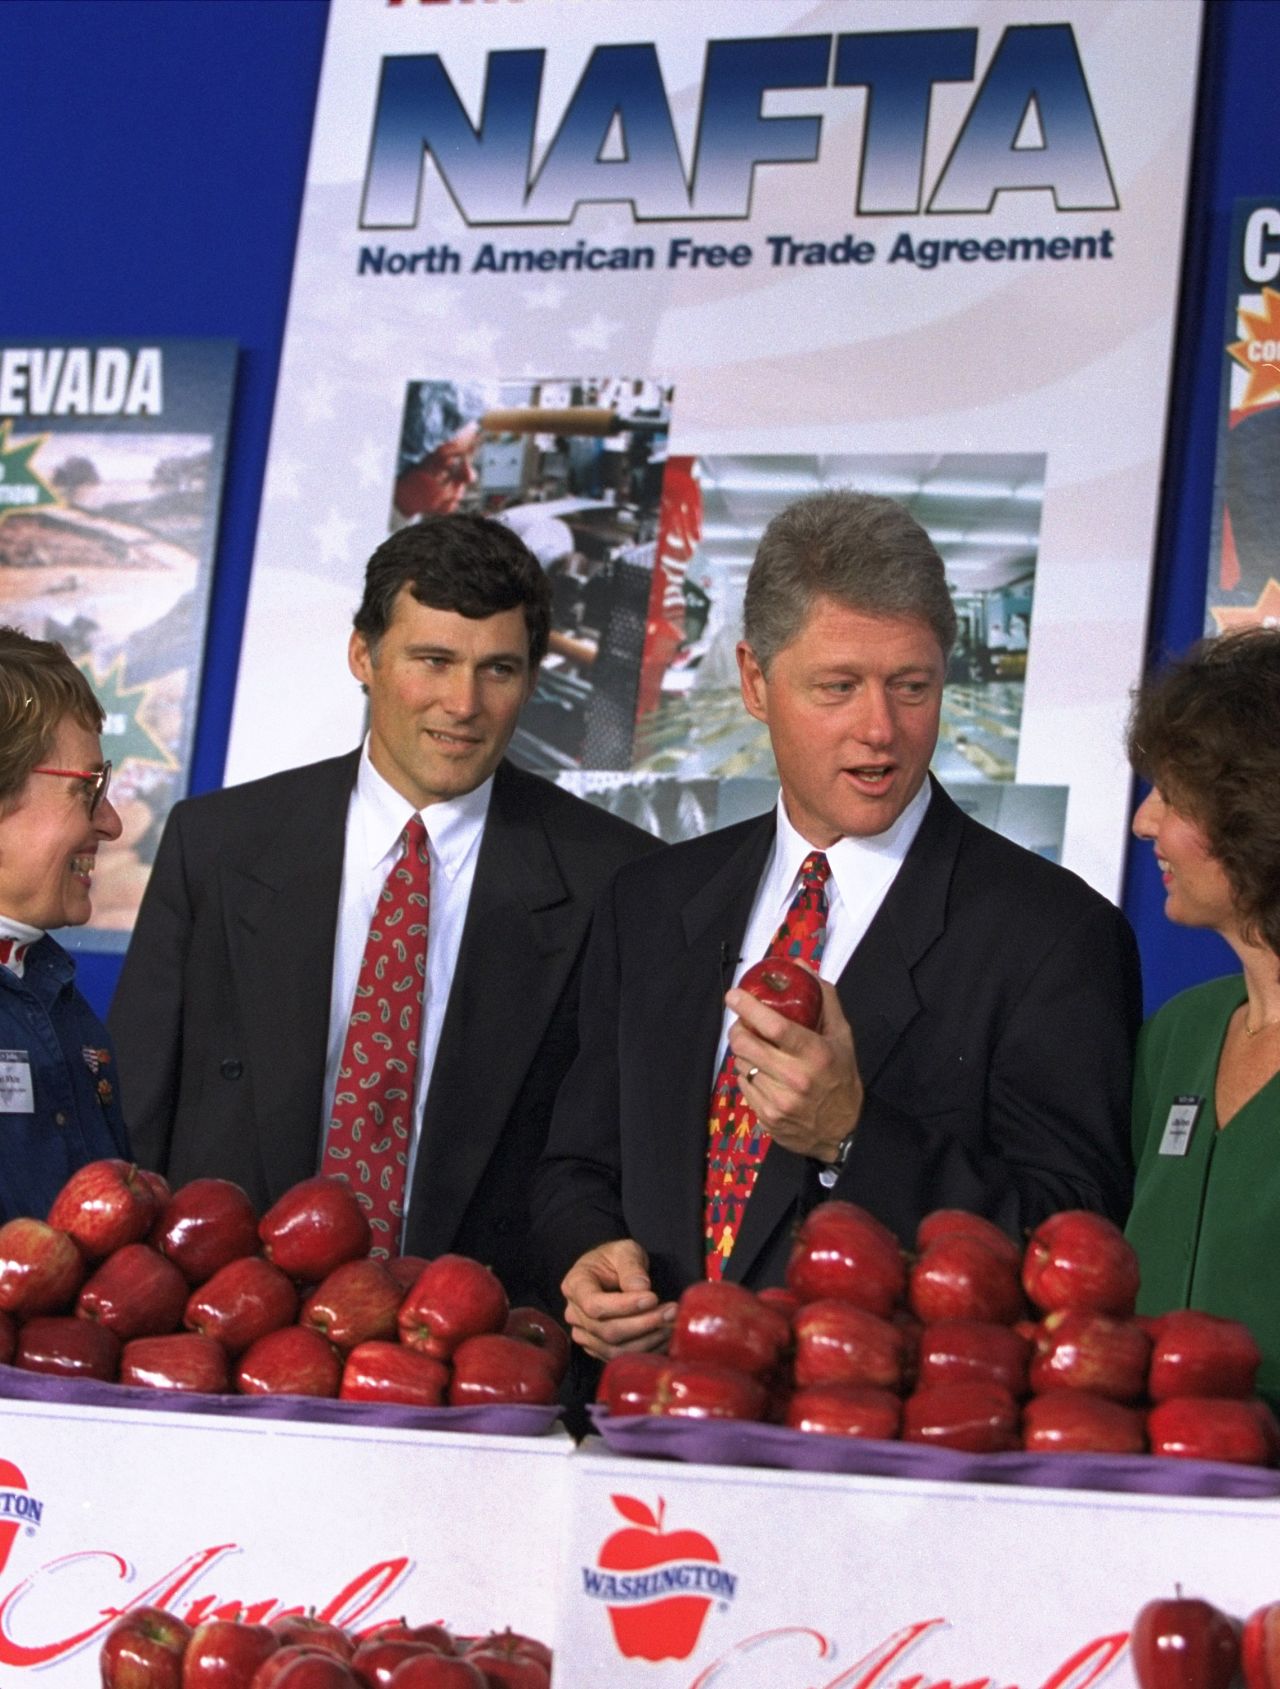 Inslee stands next to President Bill Clinton as they attend a trade fair at the White House in 1993. Inslee was elected to Congress in 1992 after serving several years in the Washington state legislature.